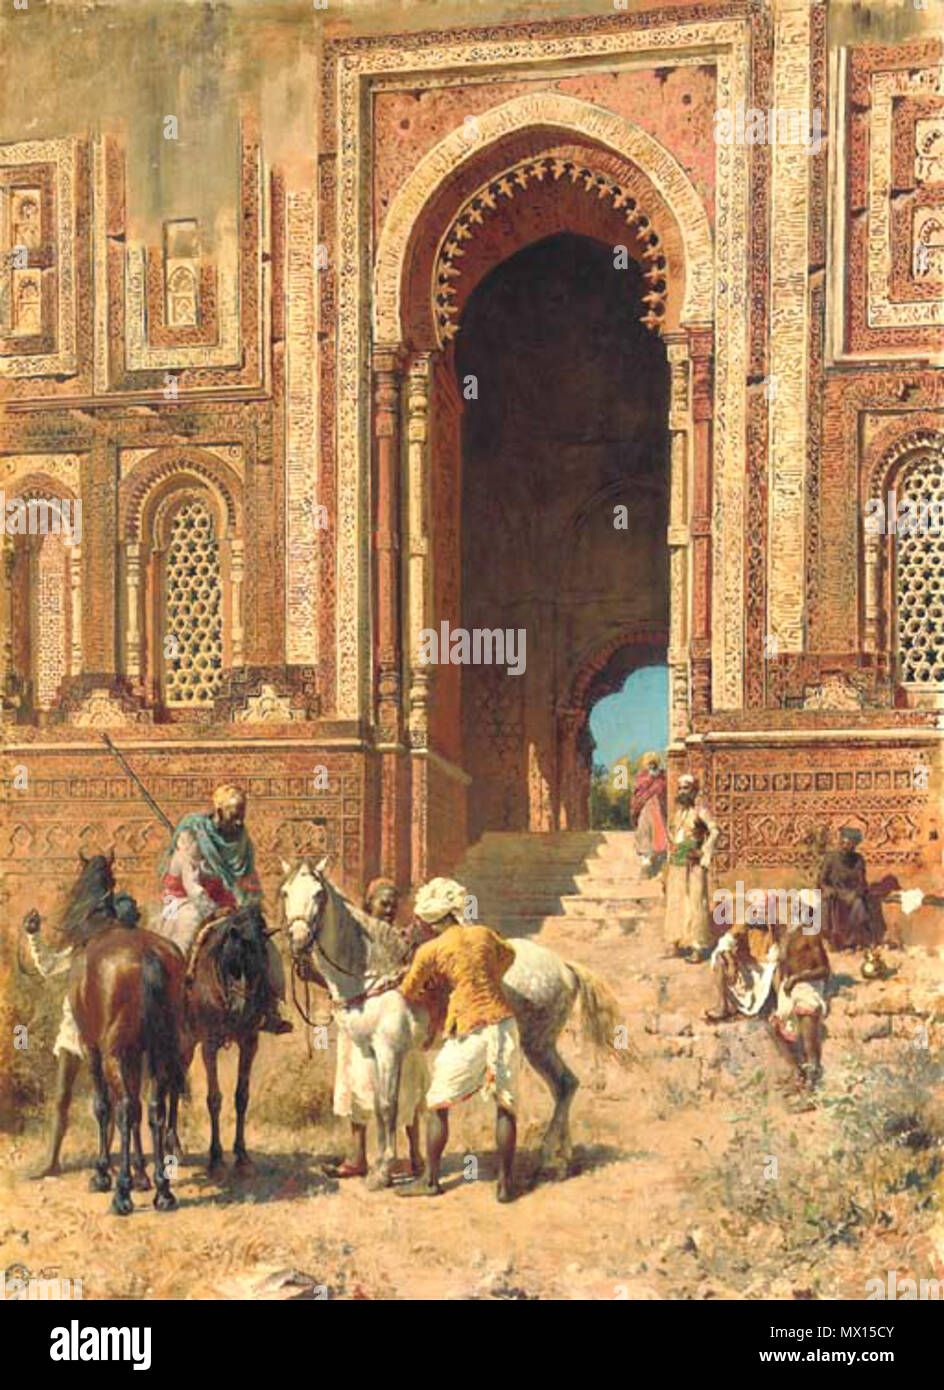 . English: 'Indian Horsemen at the Gateway of Alah-ou-din, Old Delhi,' by Edwin Lord Weeks, c.1895 Source: http://www.christies.com/LotFinder/search/LotDetail.asp?sid=&intObjectID=4380807&SE=CMWCAT04+106463+%%%%2D1917709763+&QR=M+1+39+Aqc0000900+96560++Aqc0000900+&entry=india&SU=1&RQ=True&AN=40 (downloaded Nov. 2004) 'Edwin Lord Weeks (American, 1849-1903). 'Indian horsemen at the Gateway of Alah-ou-din, Old Delhi. Signed 'E. L. Weeks' (lower left)' oil on canvas.38 x 28 in. (96.5 x 71.1 cm.).' Literature: Exhibition catalogue, The Empire of India Exhibition, London 1895, p. 214 (with the titl Stock Photo